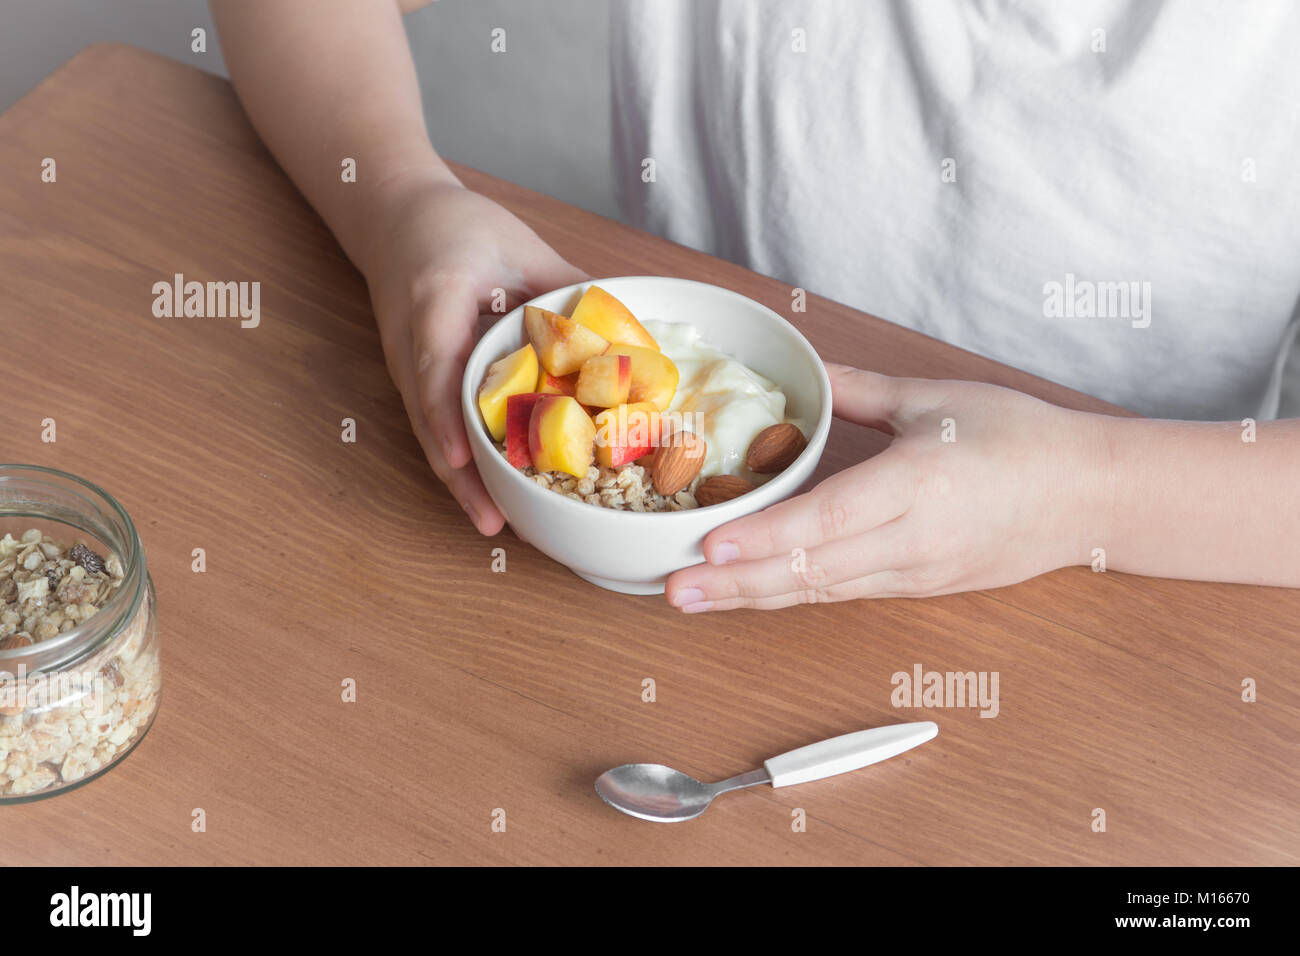 Eating healthy breakfast bowl. Oatmeal granola, yougurt, fresh nectarins inwhite bowl in female (child) hands over wooden table. Clean eating, dieting Stock Photo